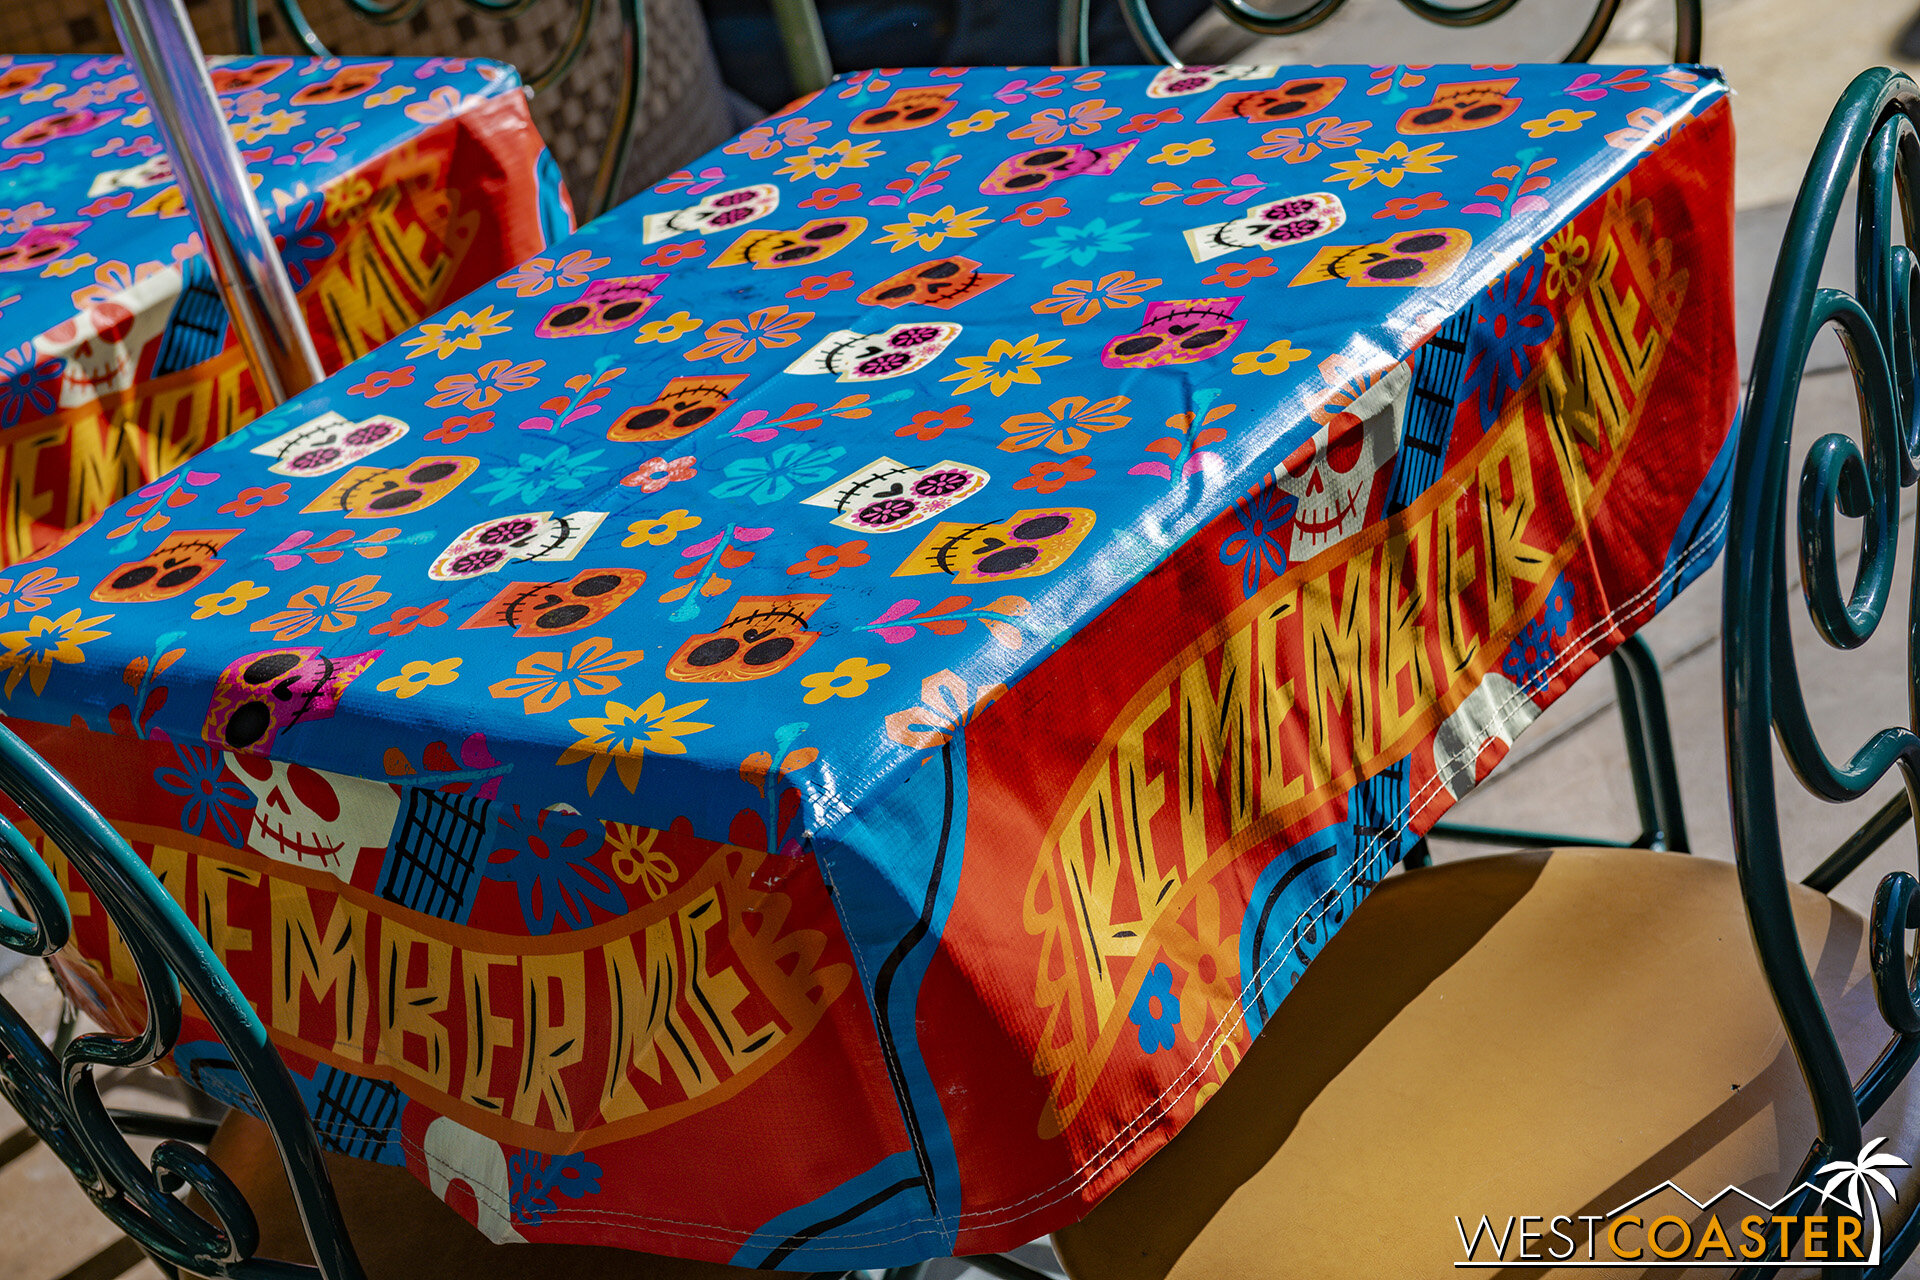  And I really enjoy the design of these table coverings! 